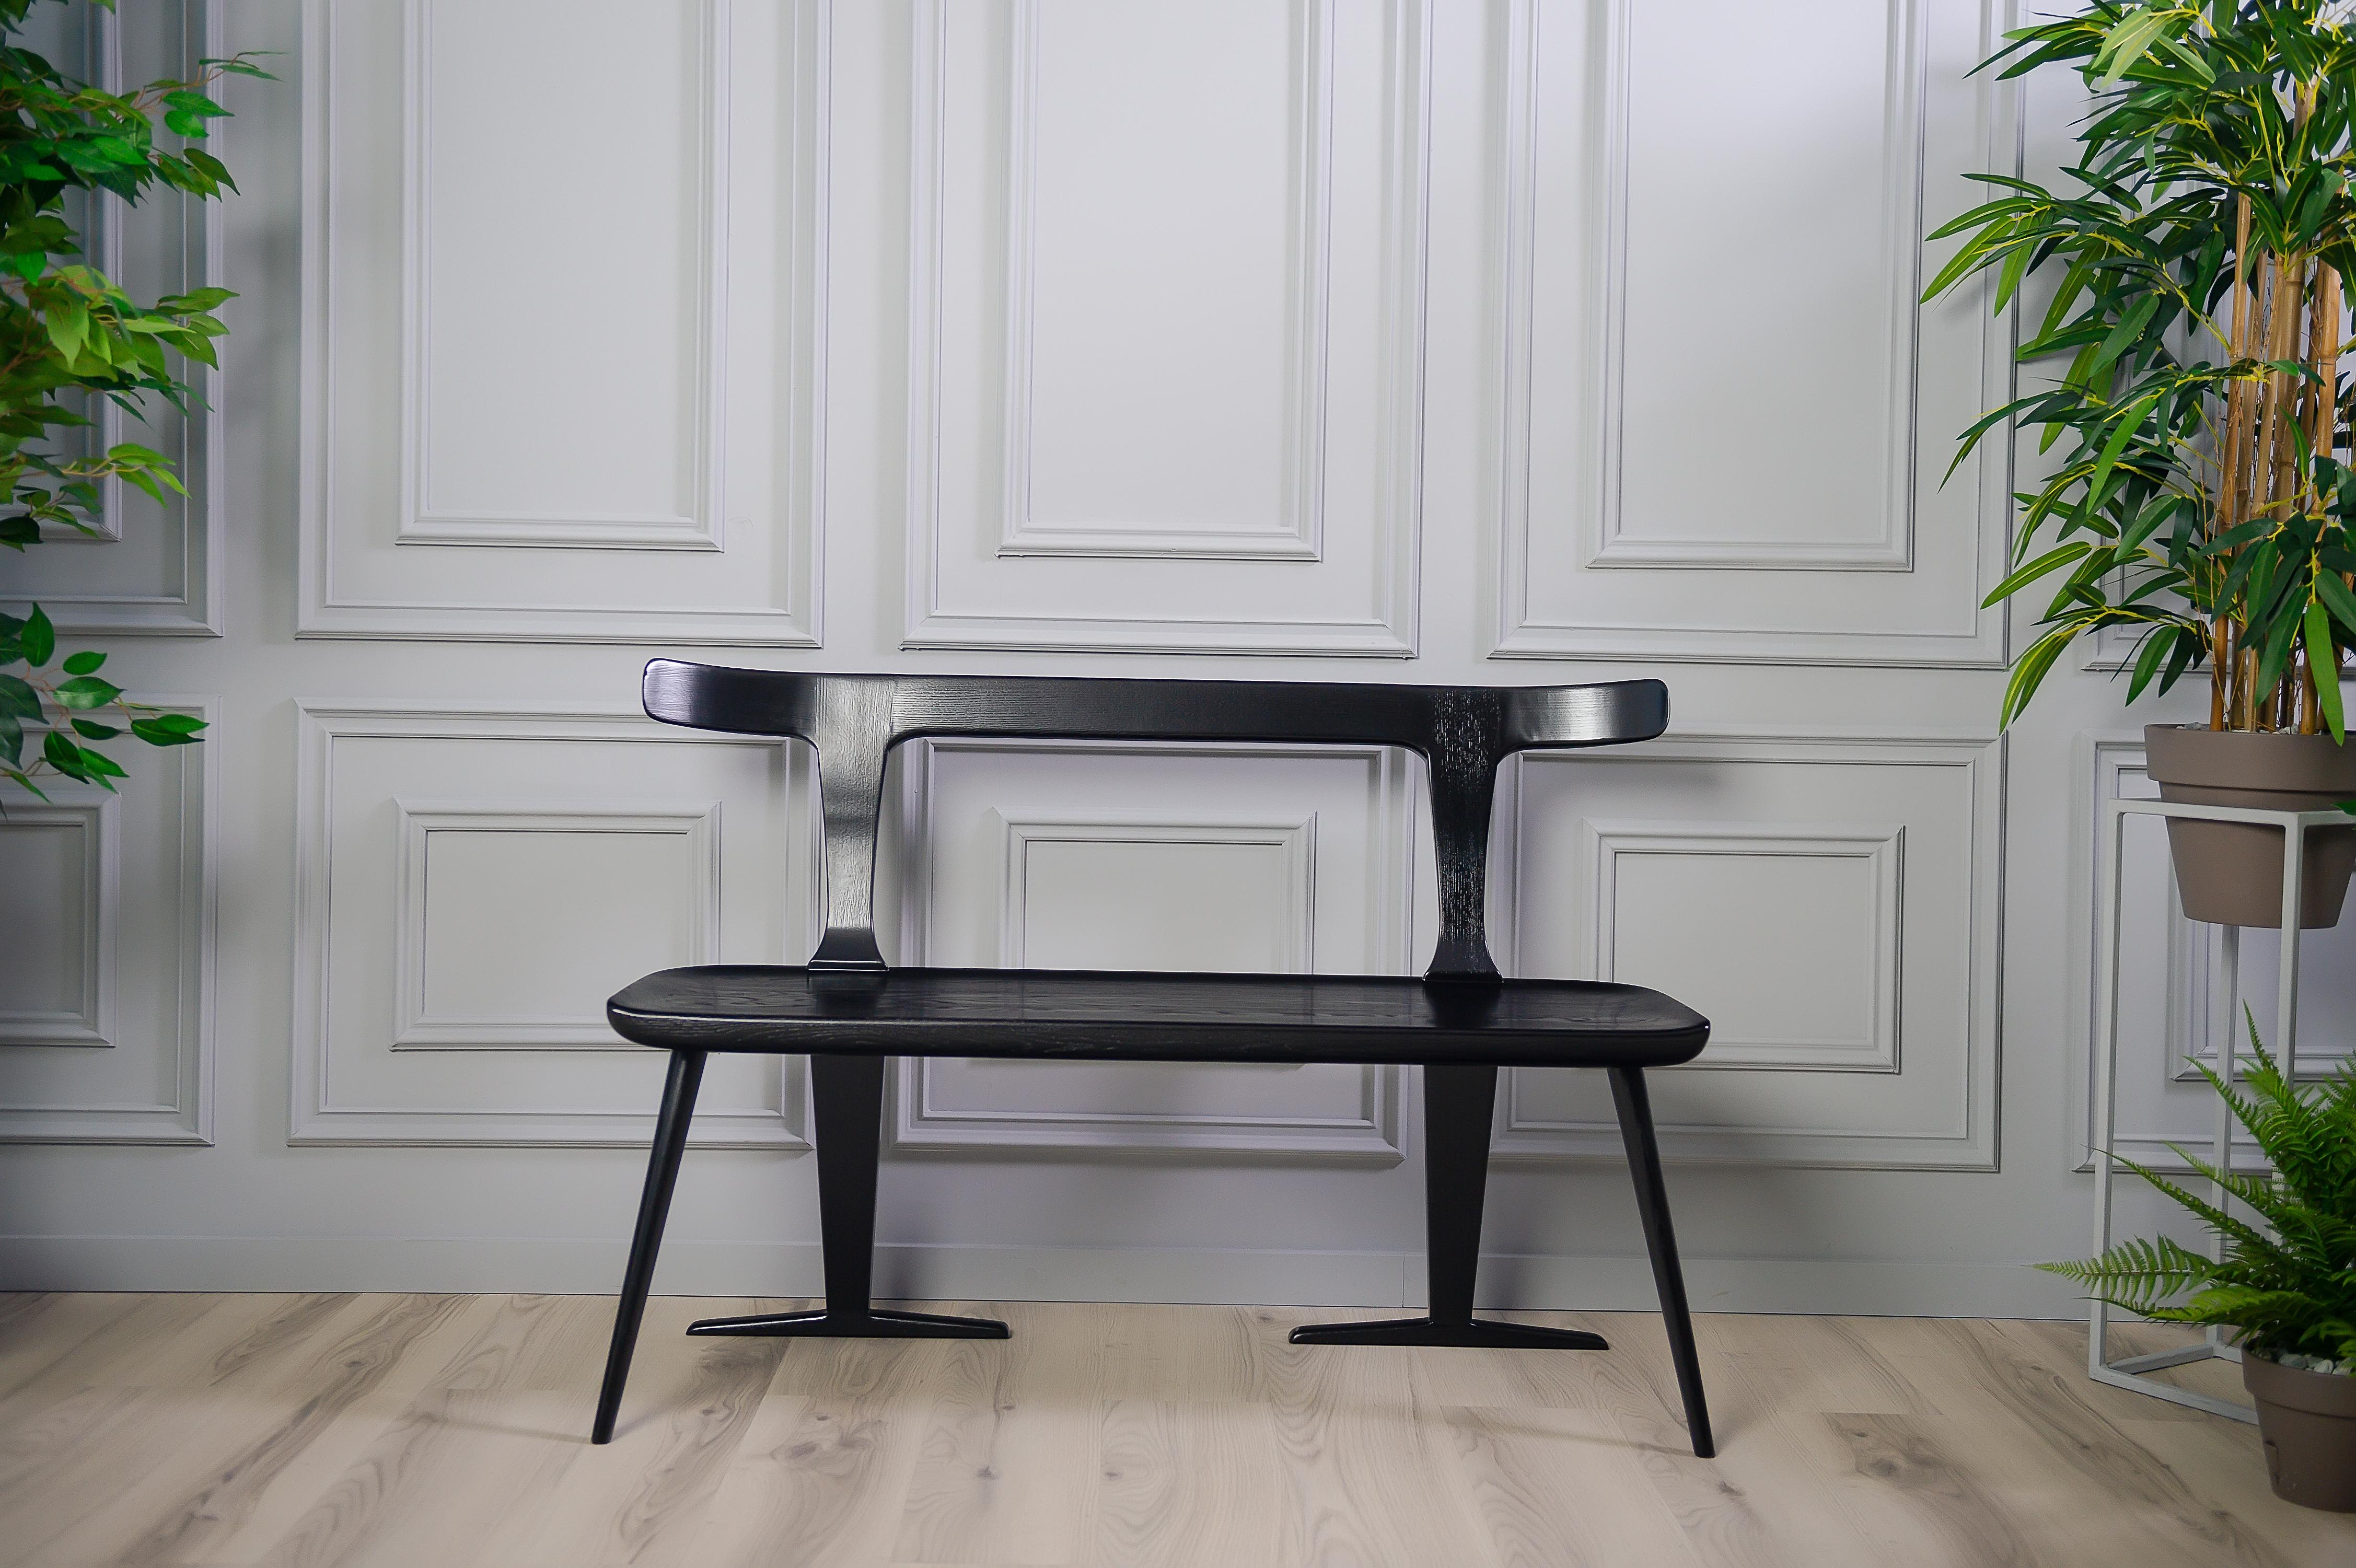 The eola bench provides a multi-use bench that can be easily placed in the kitchen, dining room, den, lounge or other space. With a double backing and forward angled legs, this Mid-Century Modern piece offers a uniqueness that otherwise cannot be